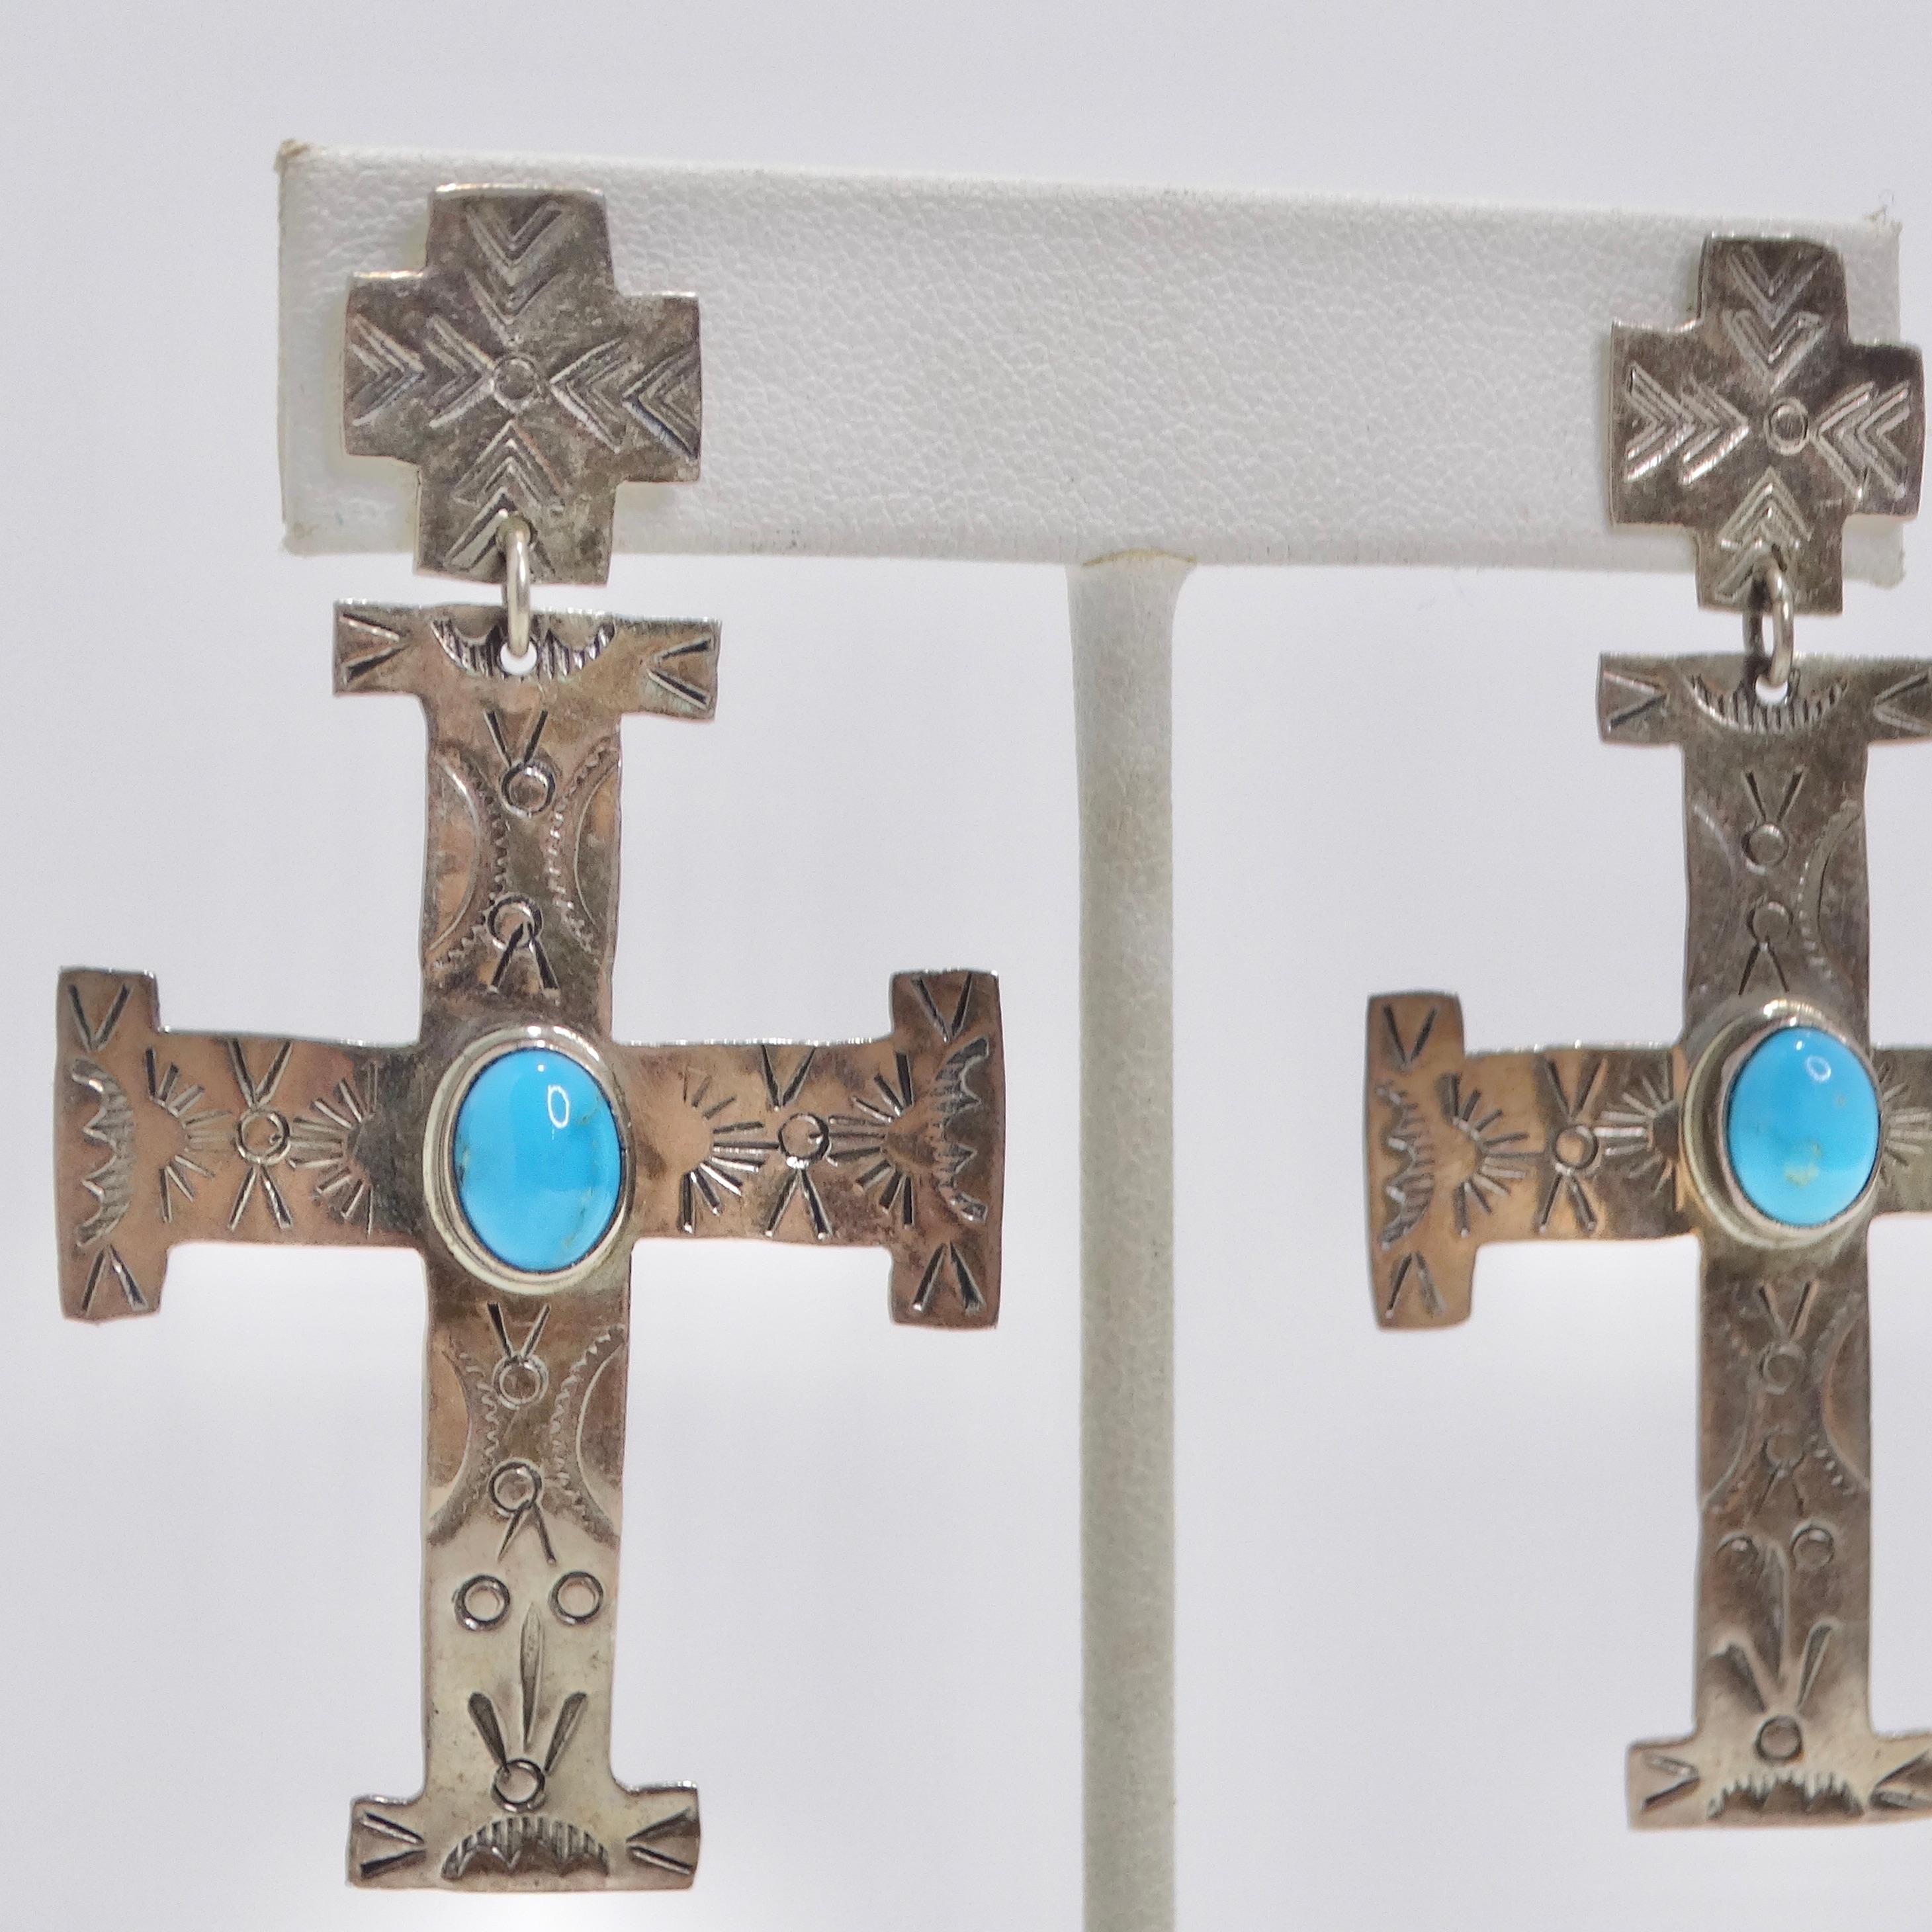 Experience the allure of the past with these 1960s Vintage Silver Turquoise Cross Earrings. These stunning silver dangle earrings boast a timeless cross motif, accentuated by captivating turquoise stone details and intricate geometric engravings. A